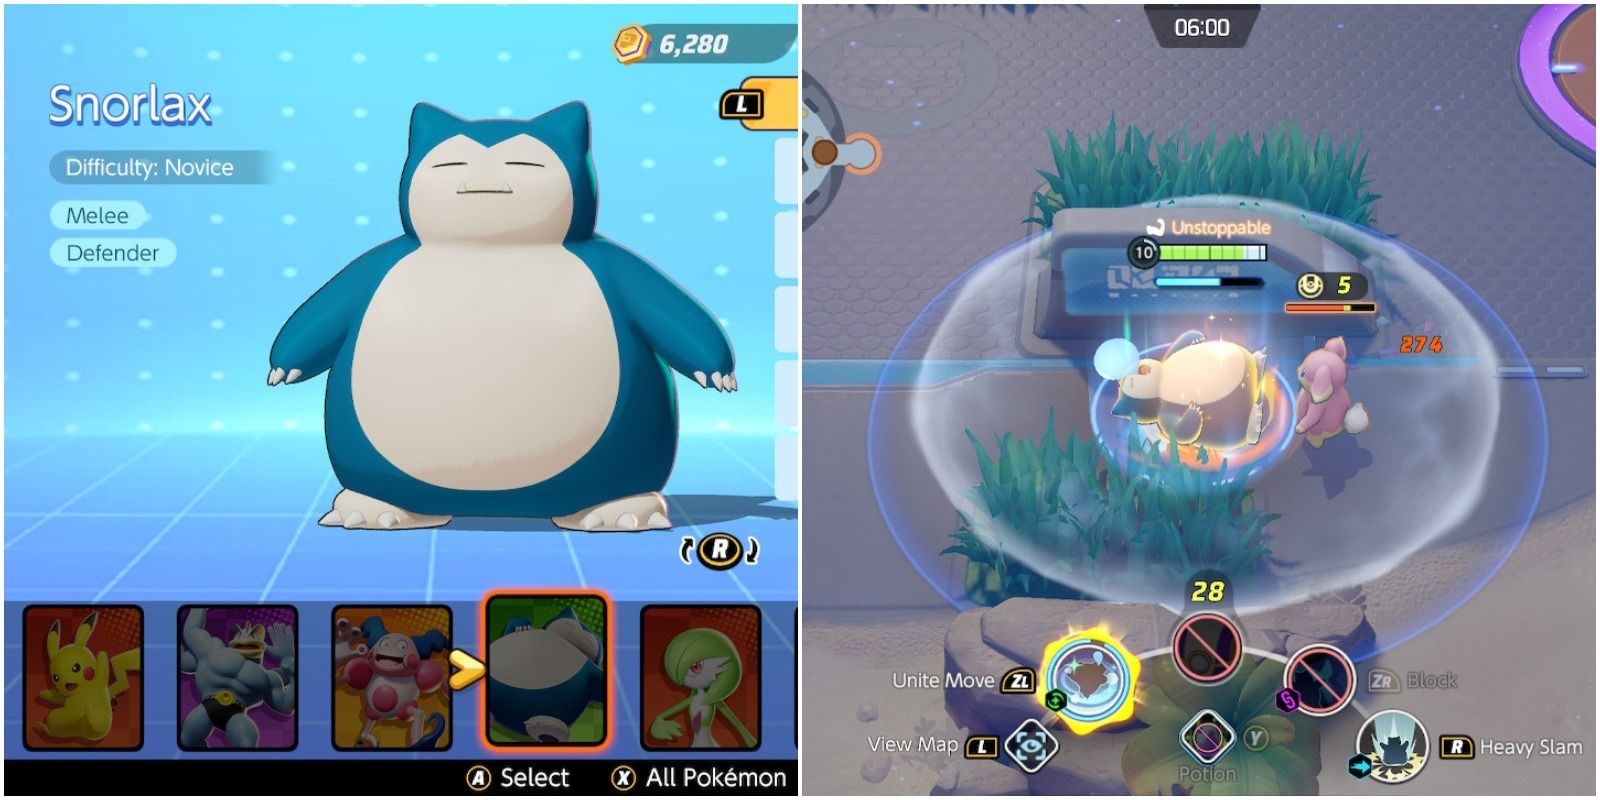 snorlax in the character select menu and using their unite move in battle.